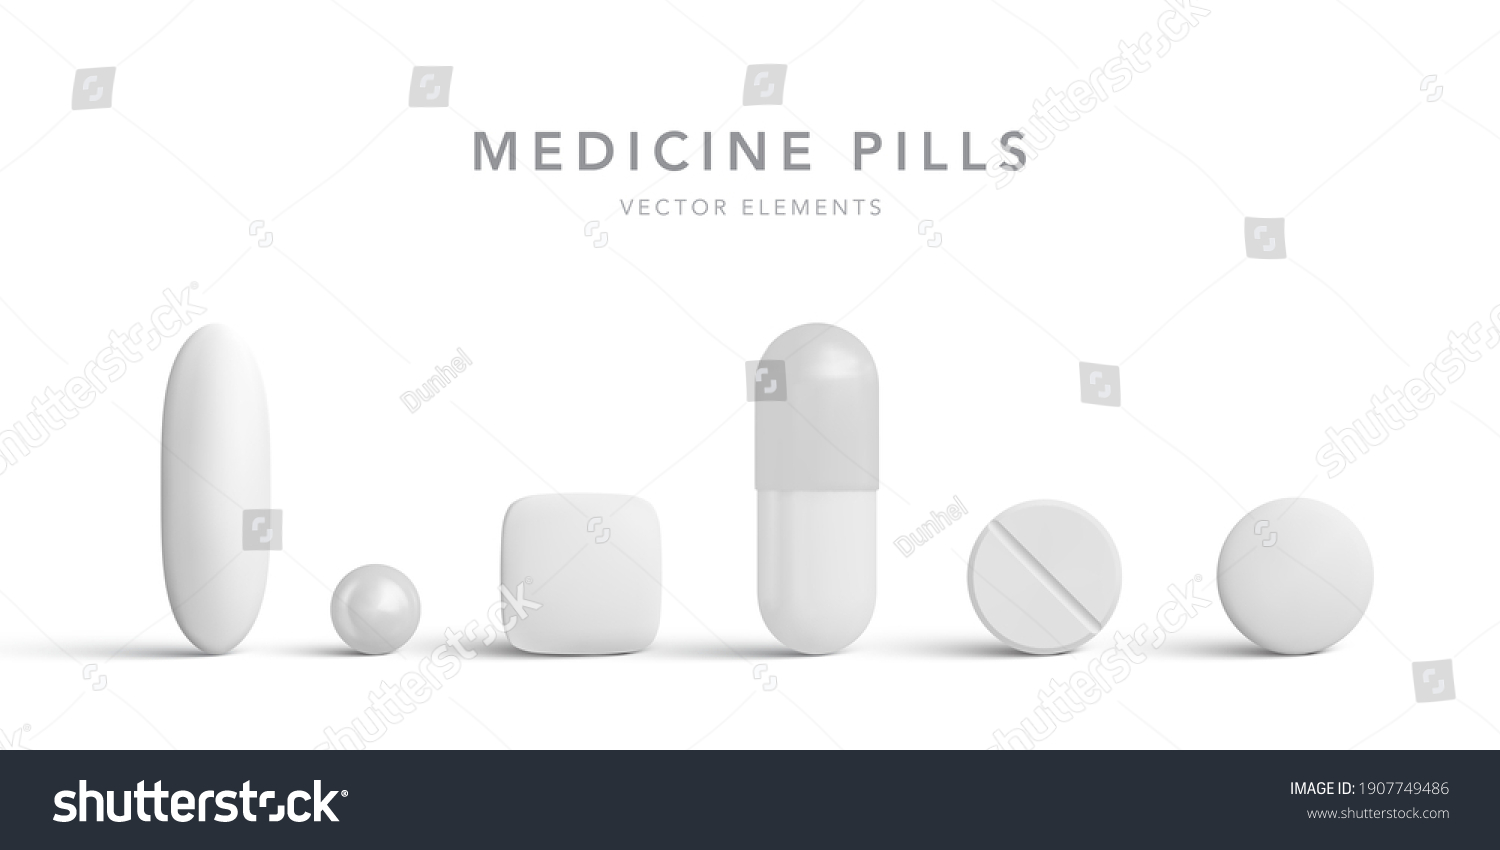 Antibiotic pills isolated on white background. Collection of oval, round and capsule shaped tablets. Medicine and drugs. Vector illustration #1907749486